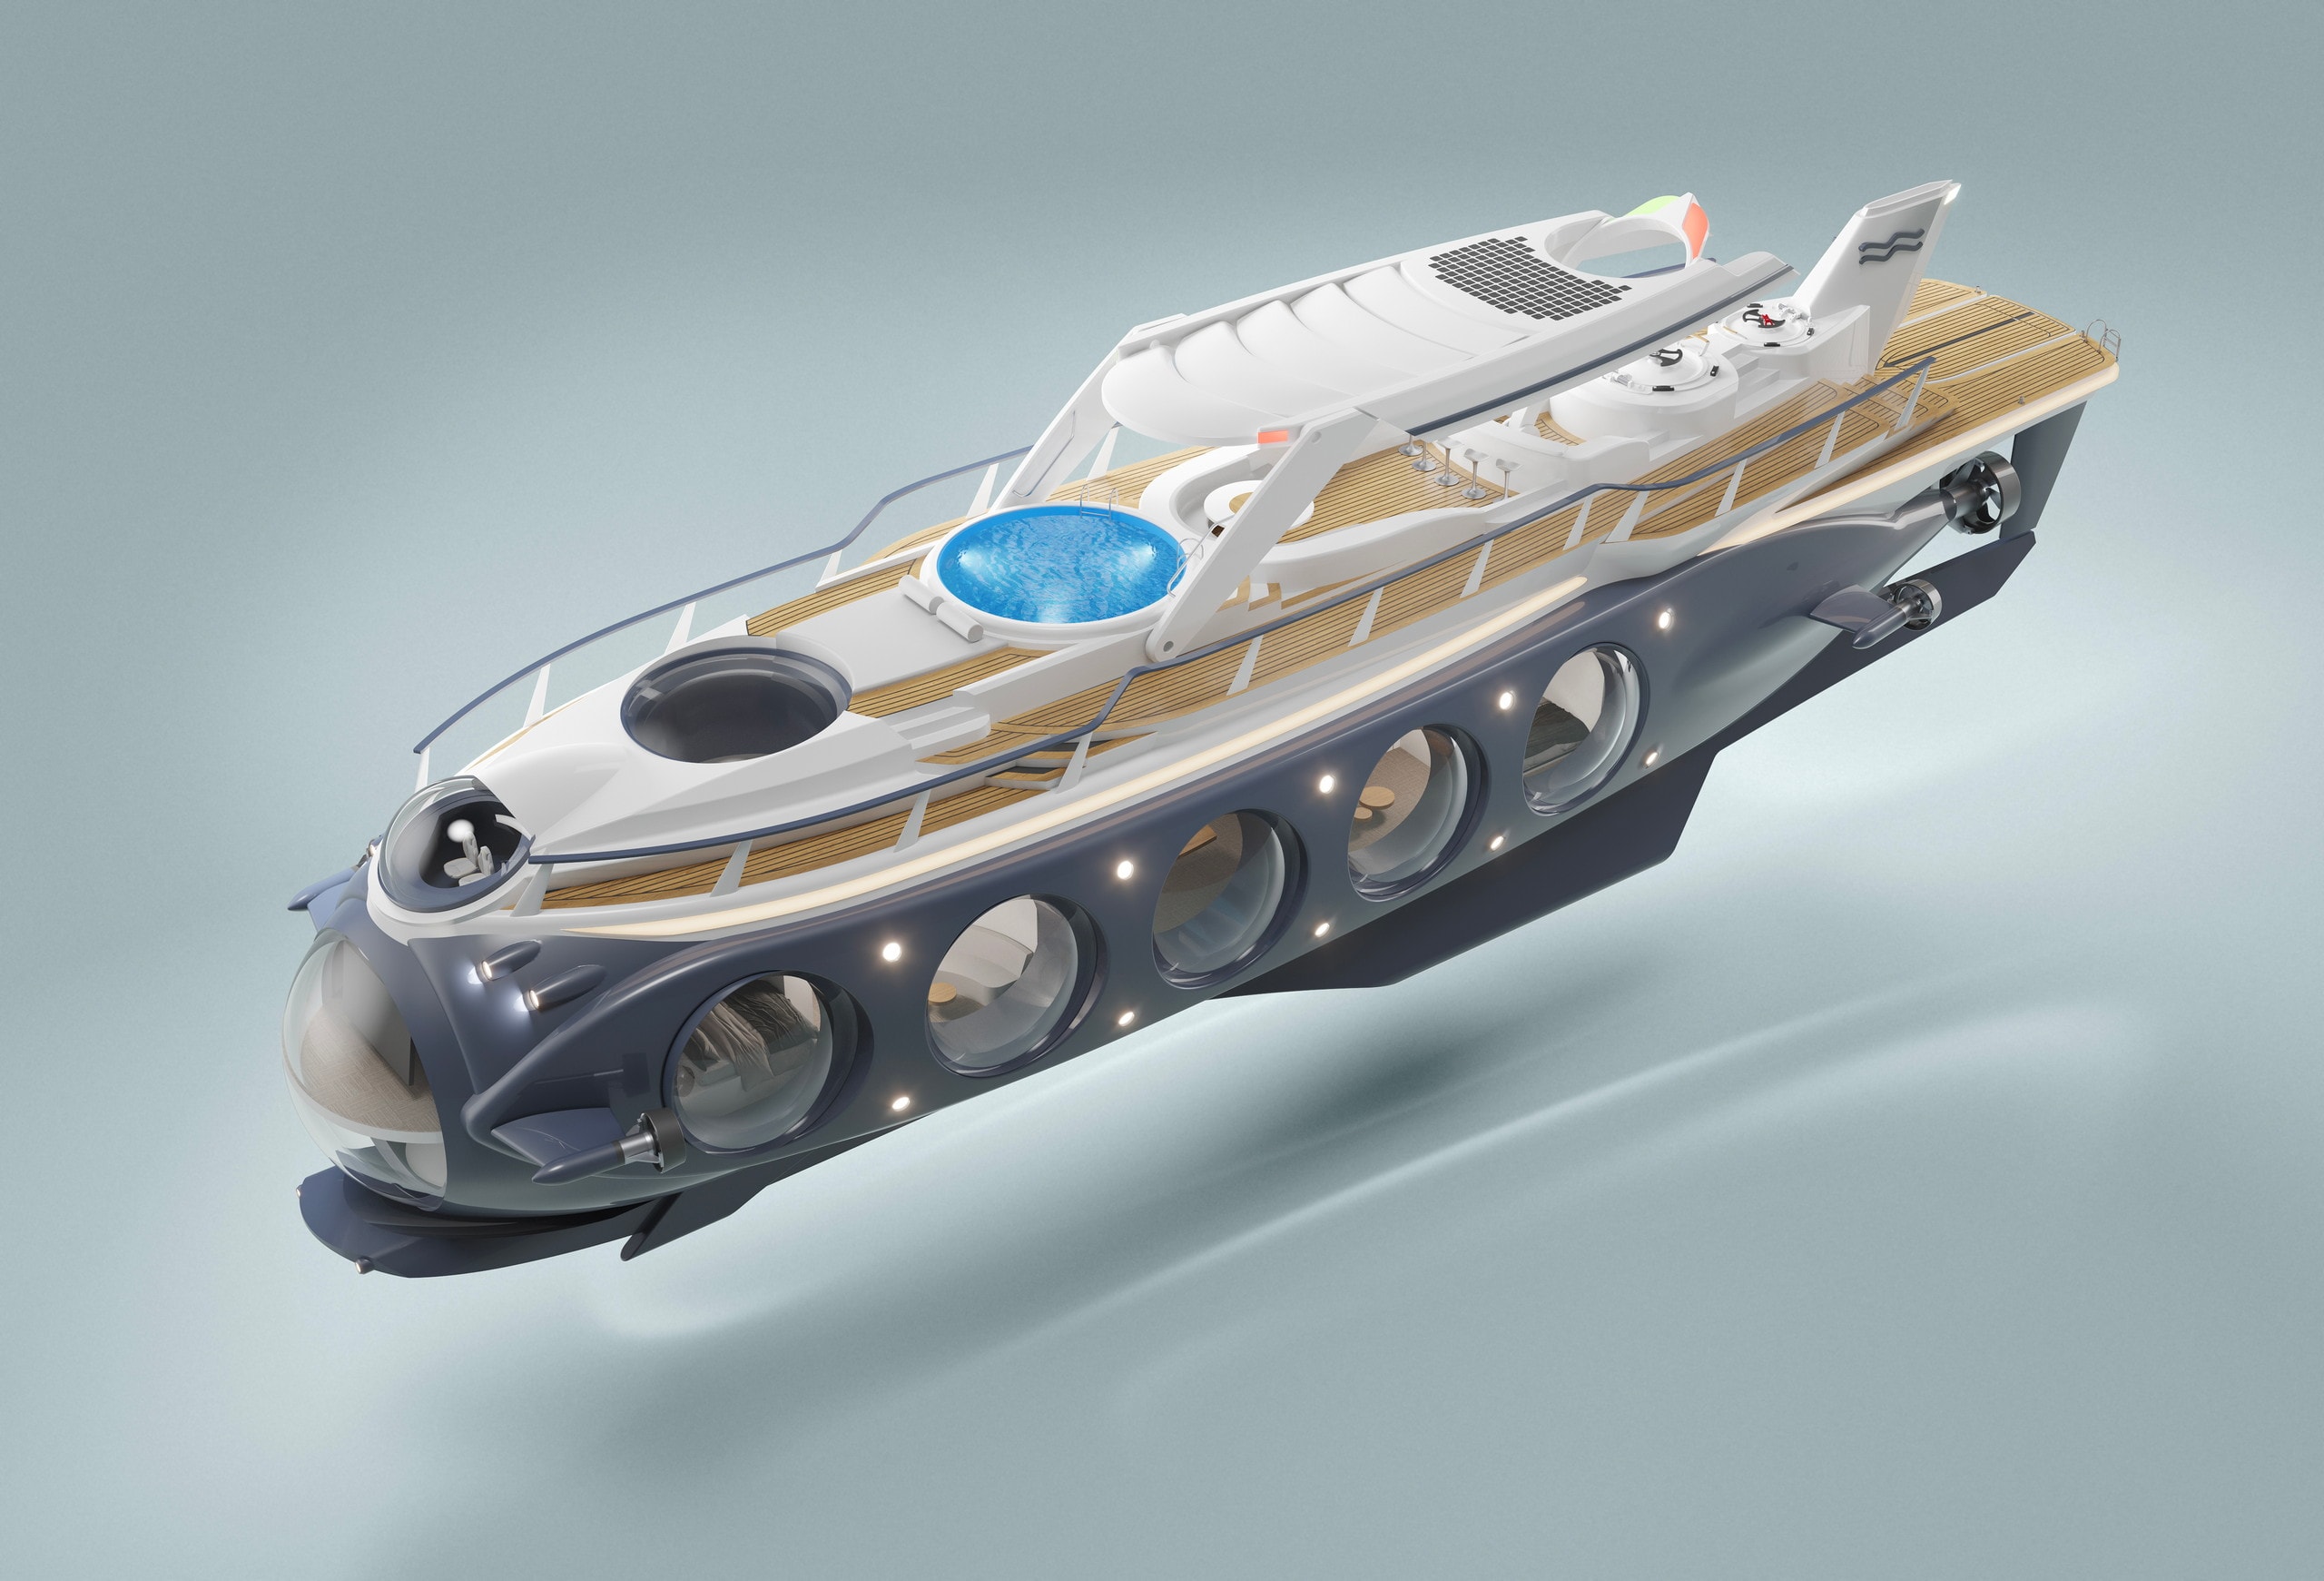 https://s1.cdn.autoevolution.com/images/news/the-real-nautilus-can-turn-from-a-yacht-into-a-submarine-better-than-jules-verne-imagined-200095_1.jpg